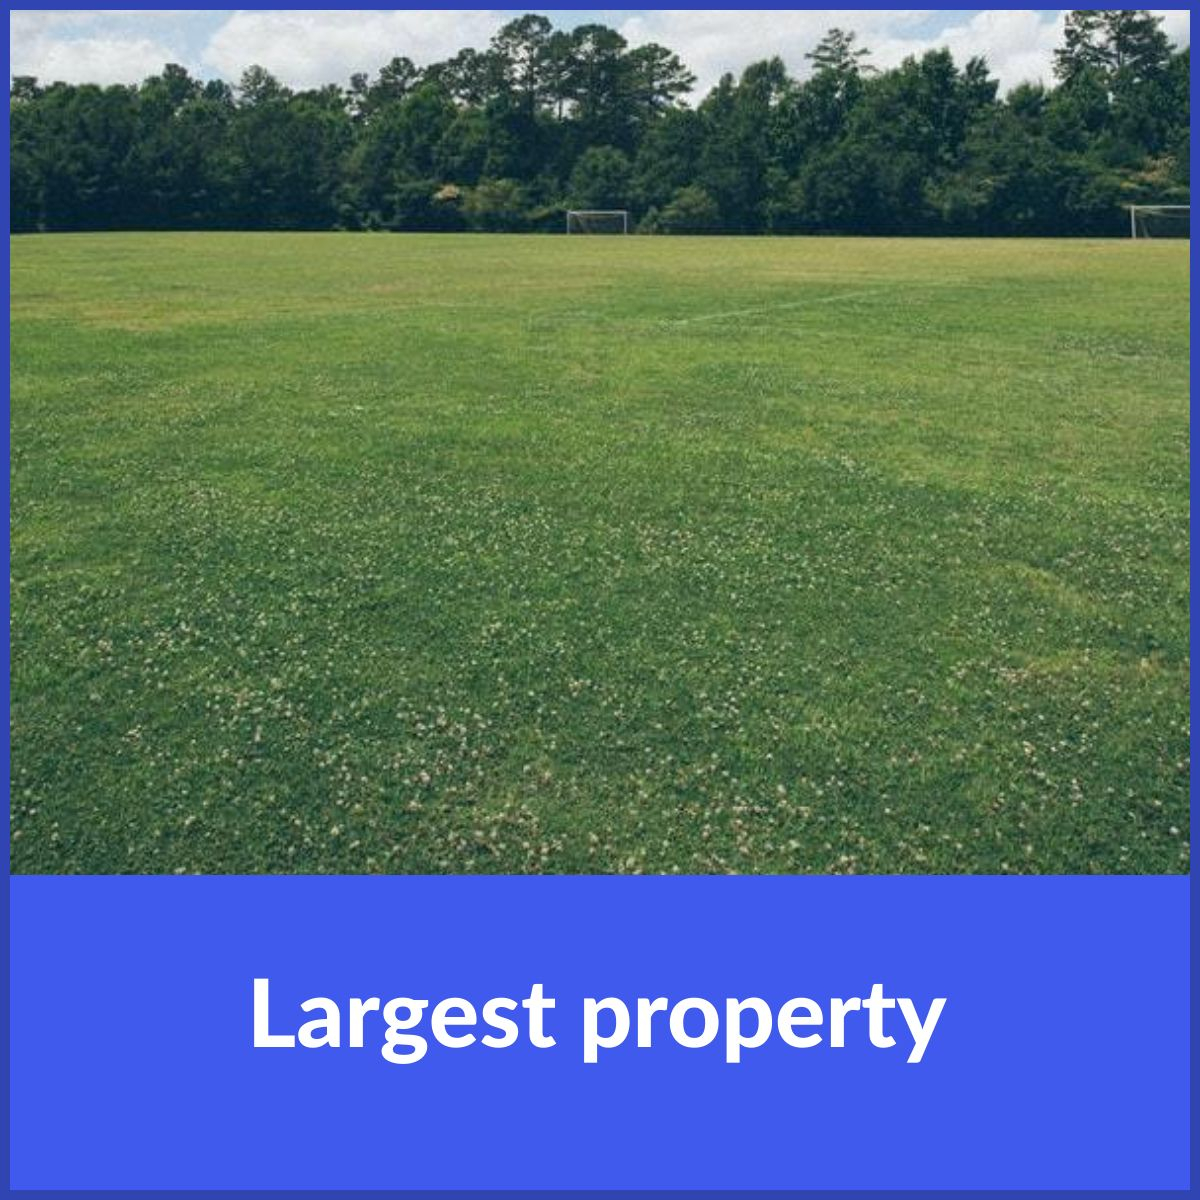 Kalispell land for sale - largest and smallest parcels photo of large lawn and trees